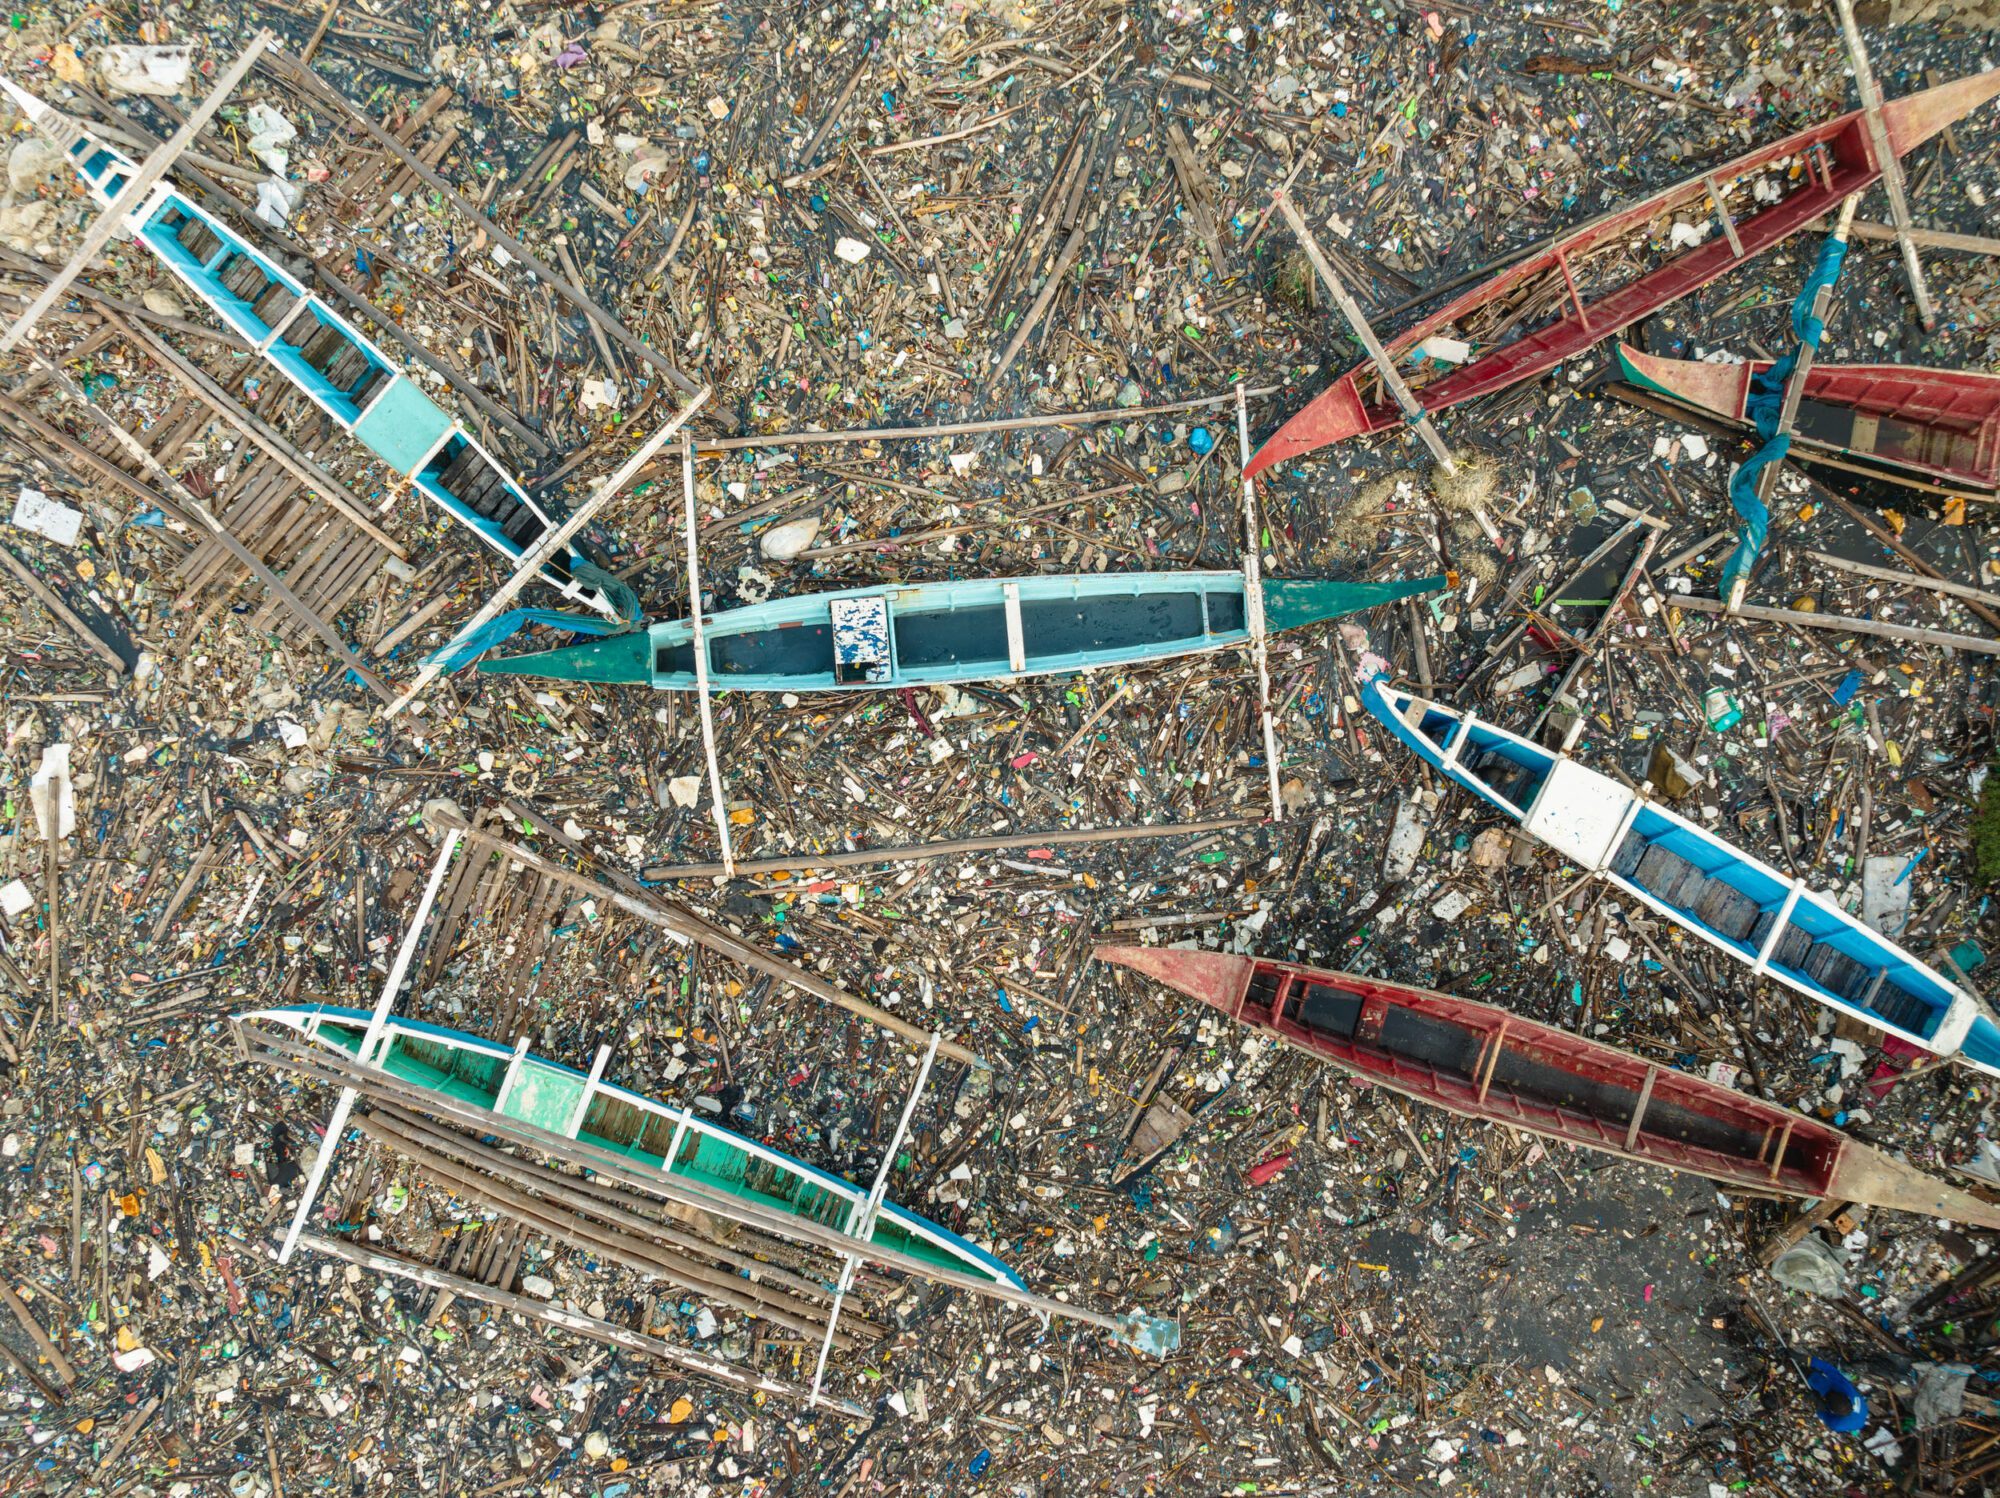 A birdseye view of thin boats in green blue and red; the ground around them is littered with colourful small bits of plastic